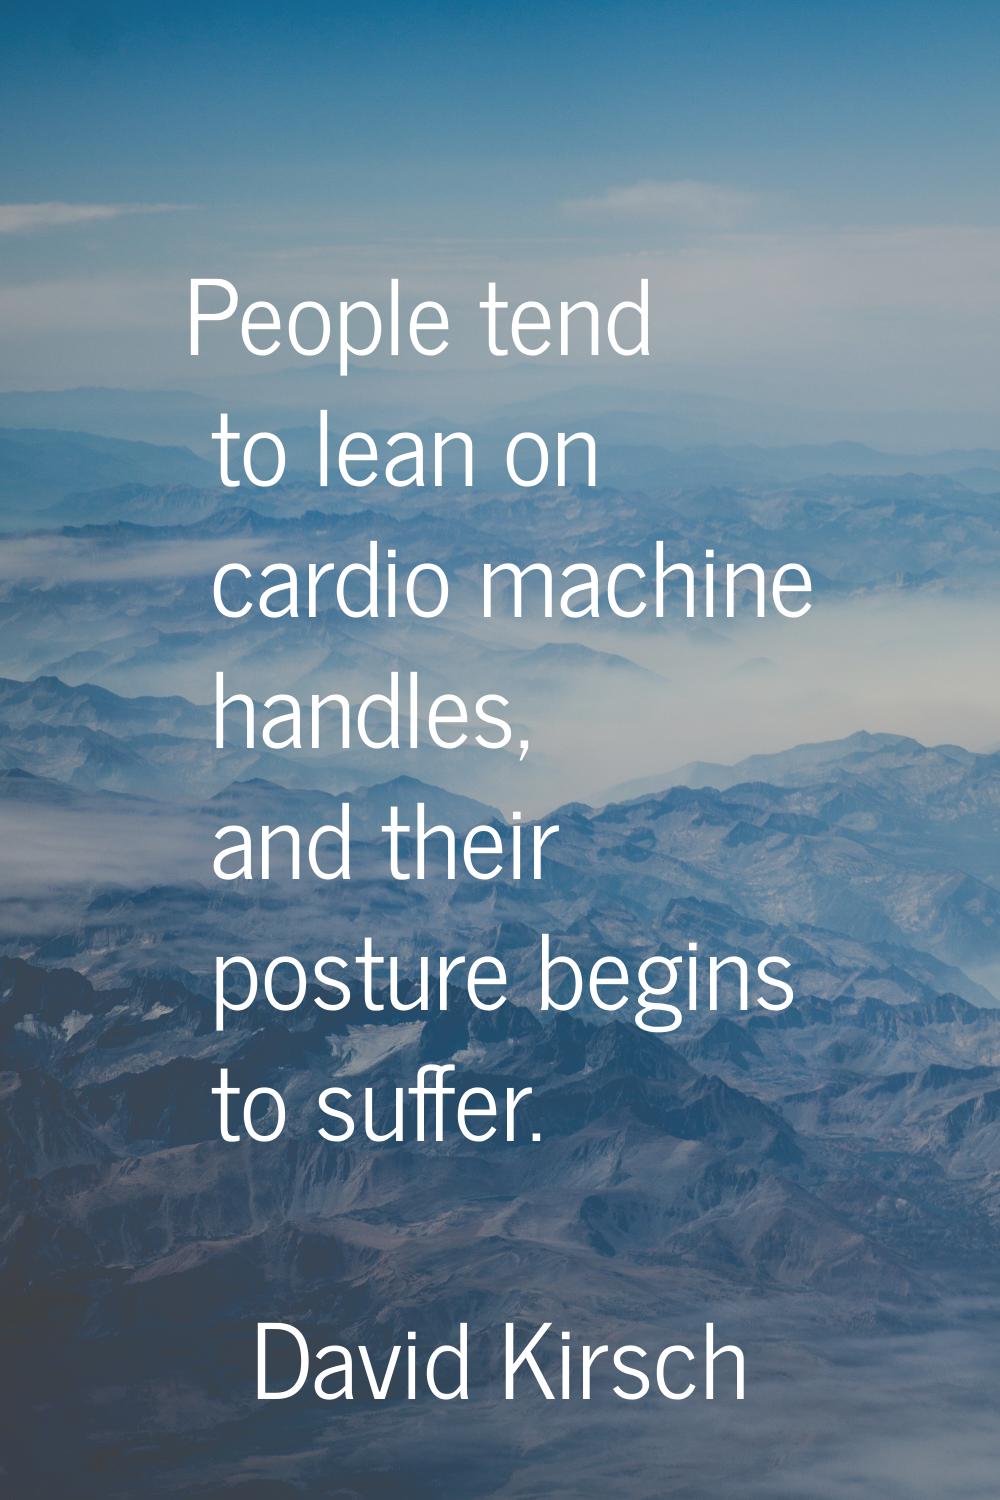 People tend to lean on cardio machine handles, and their posture begins to suffer.